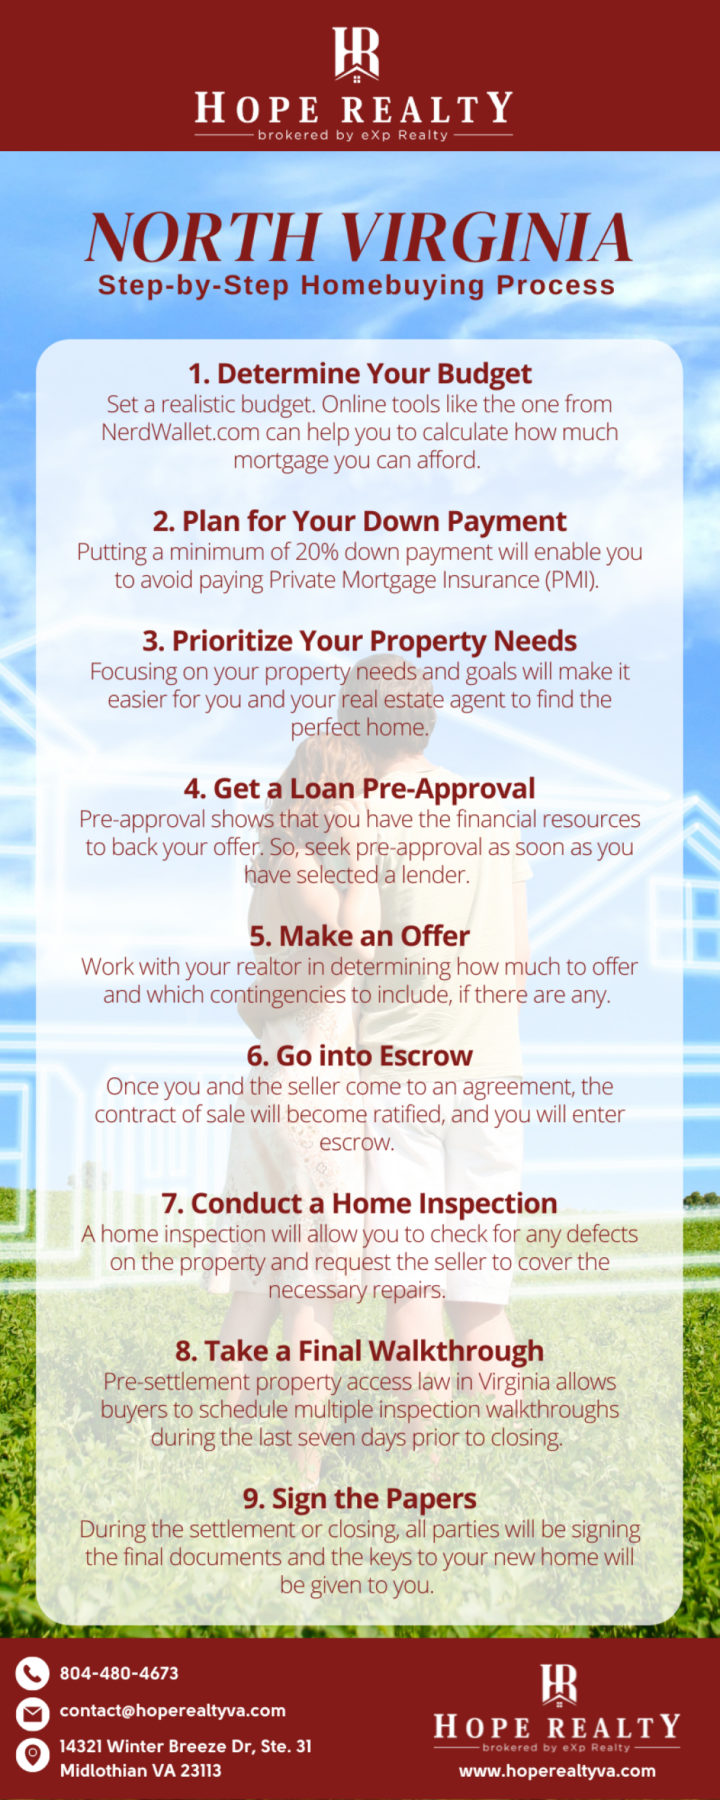 Homebuying Tips in North Virginia